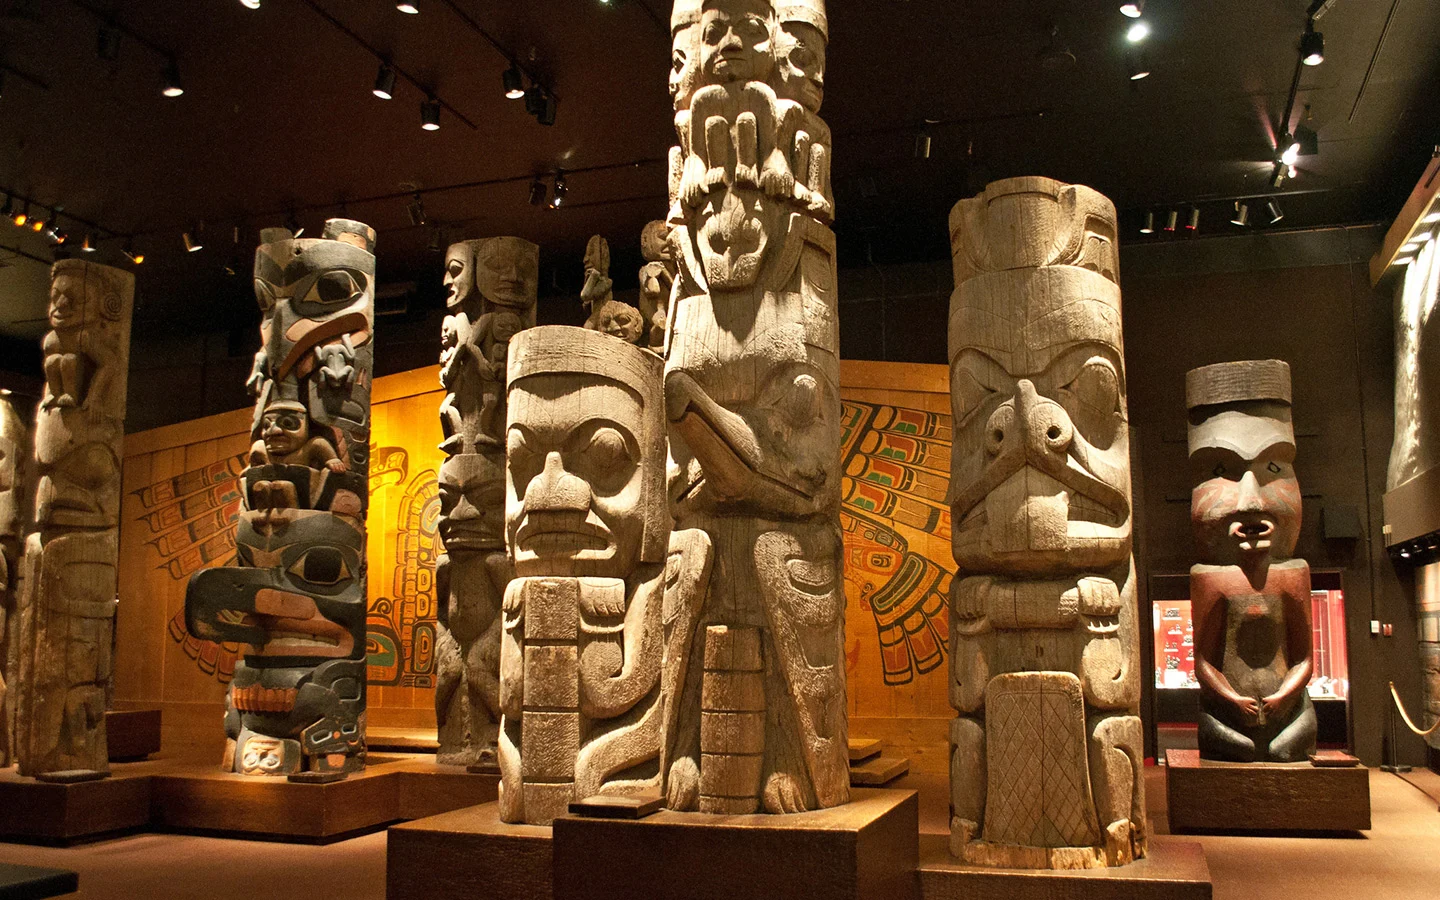 Totem poles in the Royal BC Museum